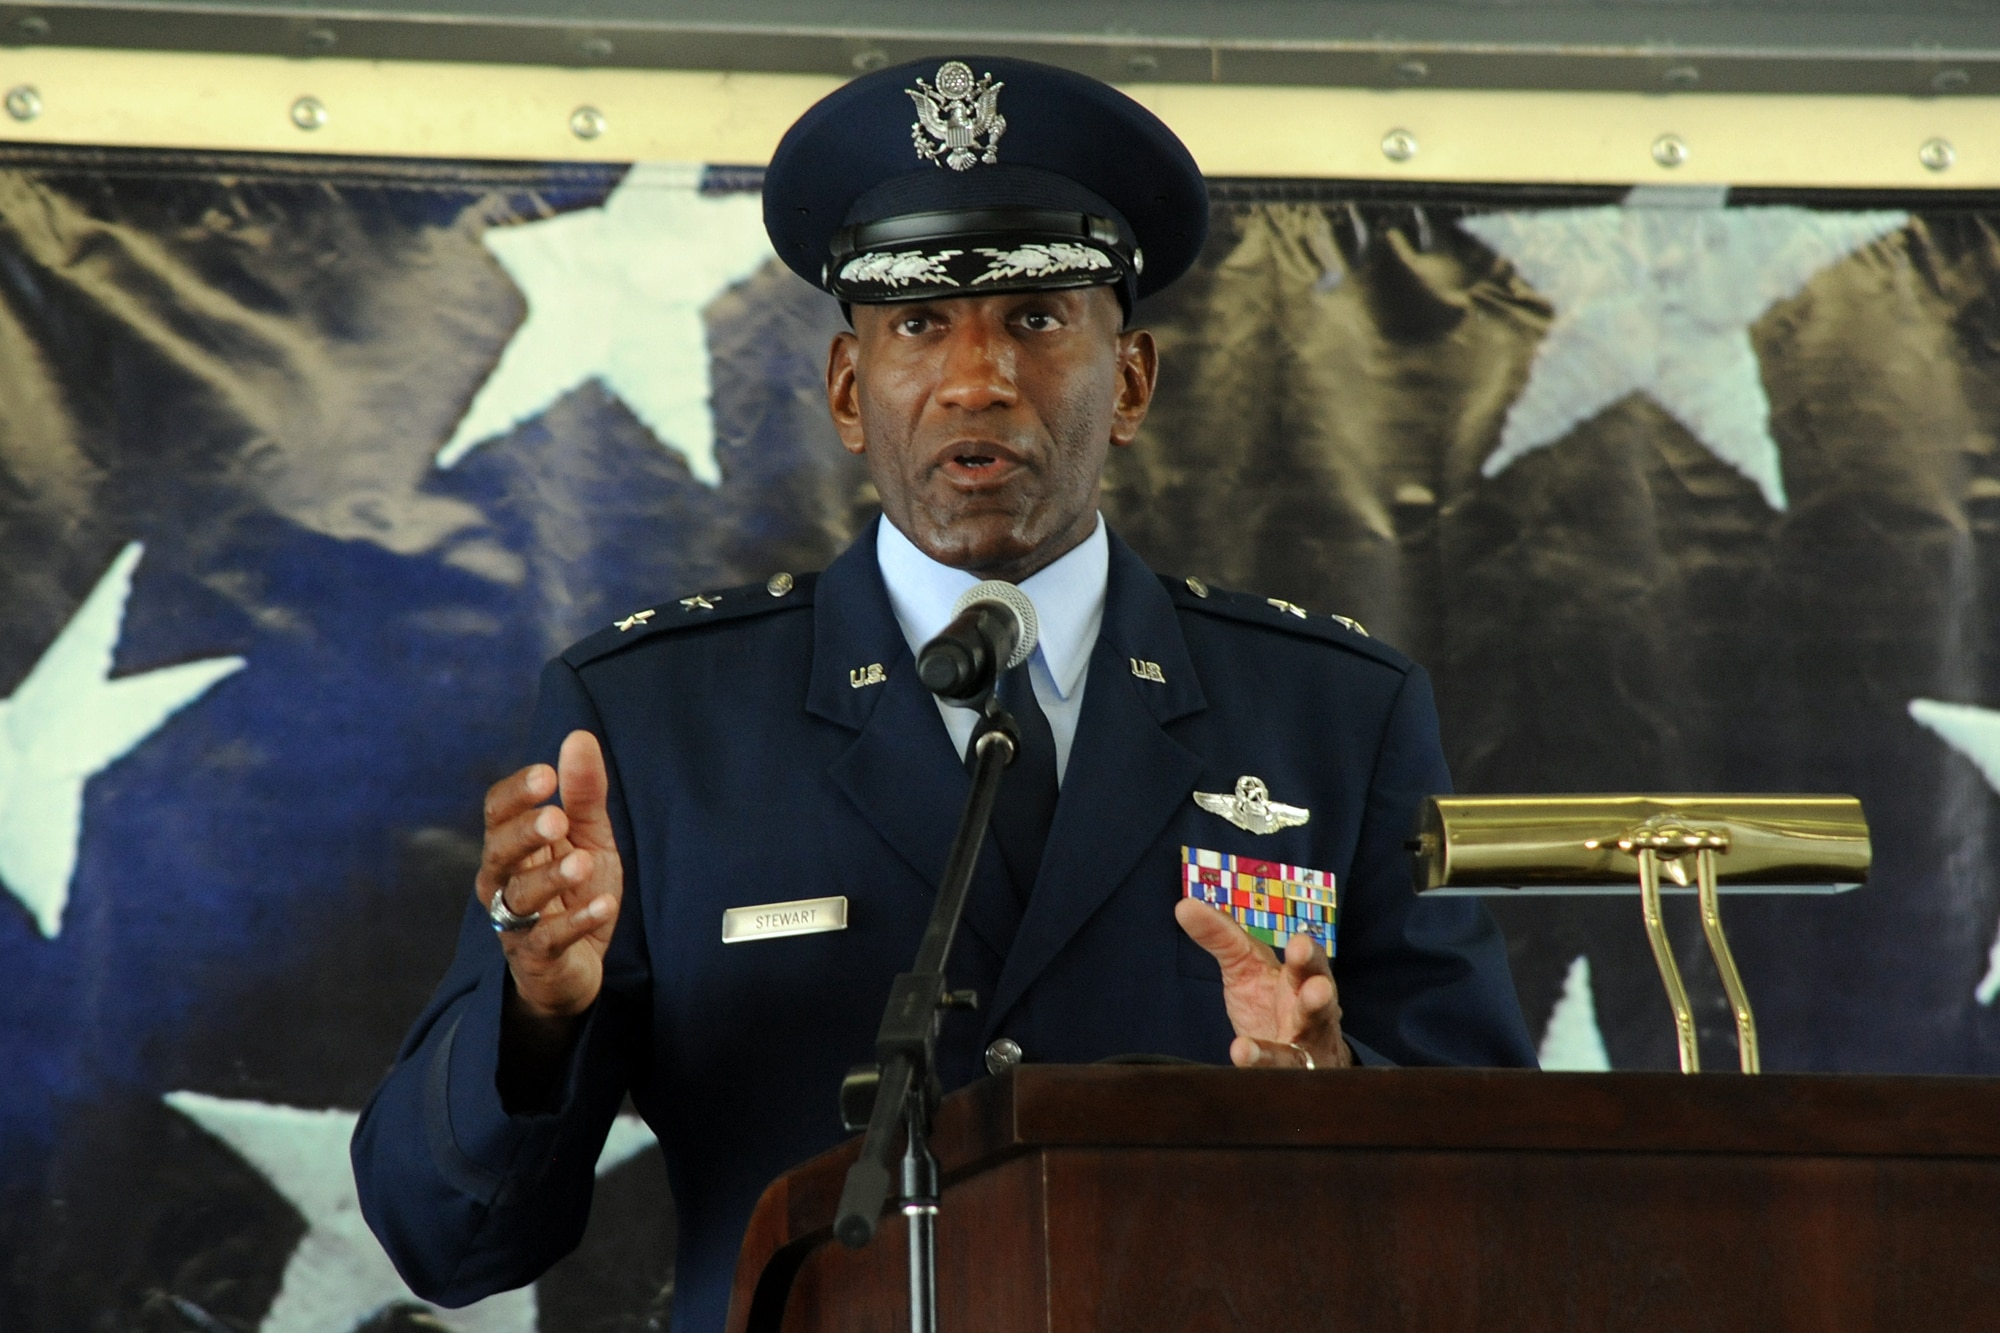 Air Force Personnel Center Commander Maj. Gen. A.J. Stewart discusses the way ahead for the new AFPC organization at the Air Force personnel, manpower and services inactivation and consolidation ceremony July 17 at Randolph Air Force Base. (U.S. Air Force photo/Richard F. McFadden)